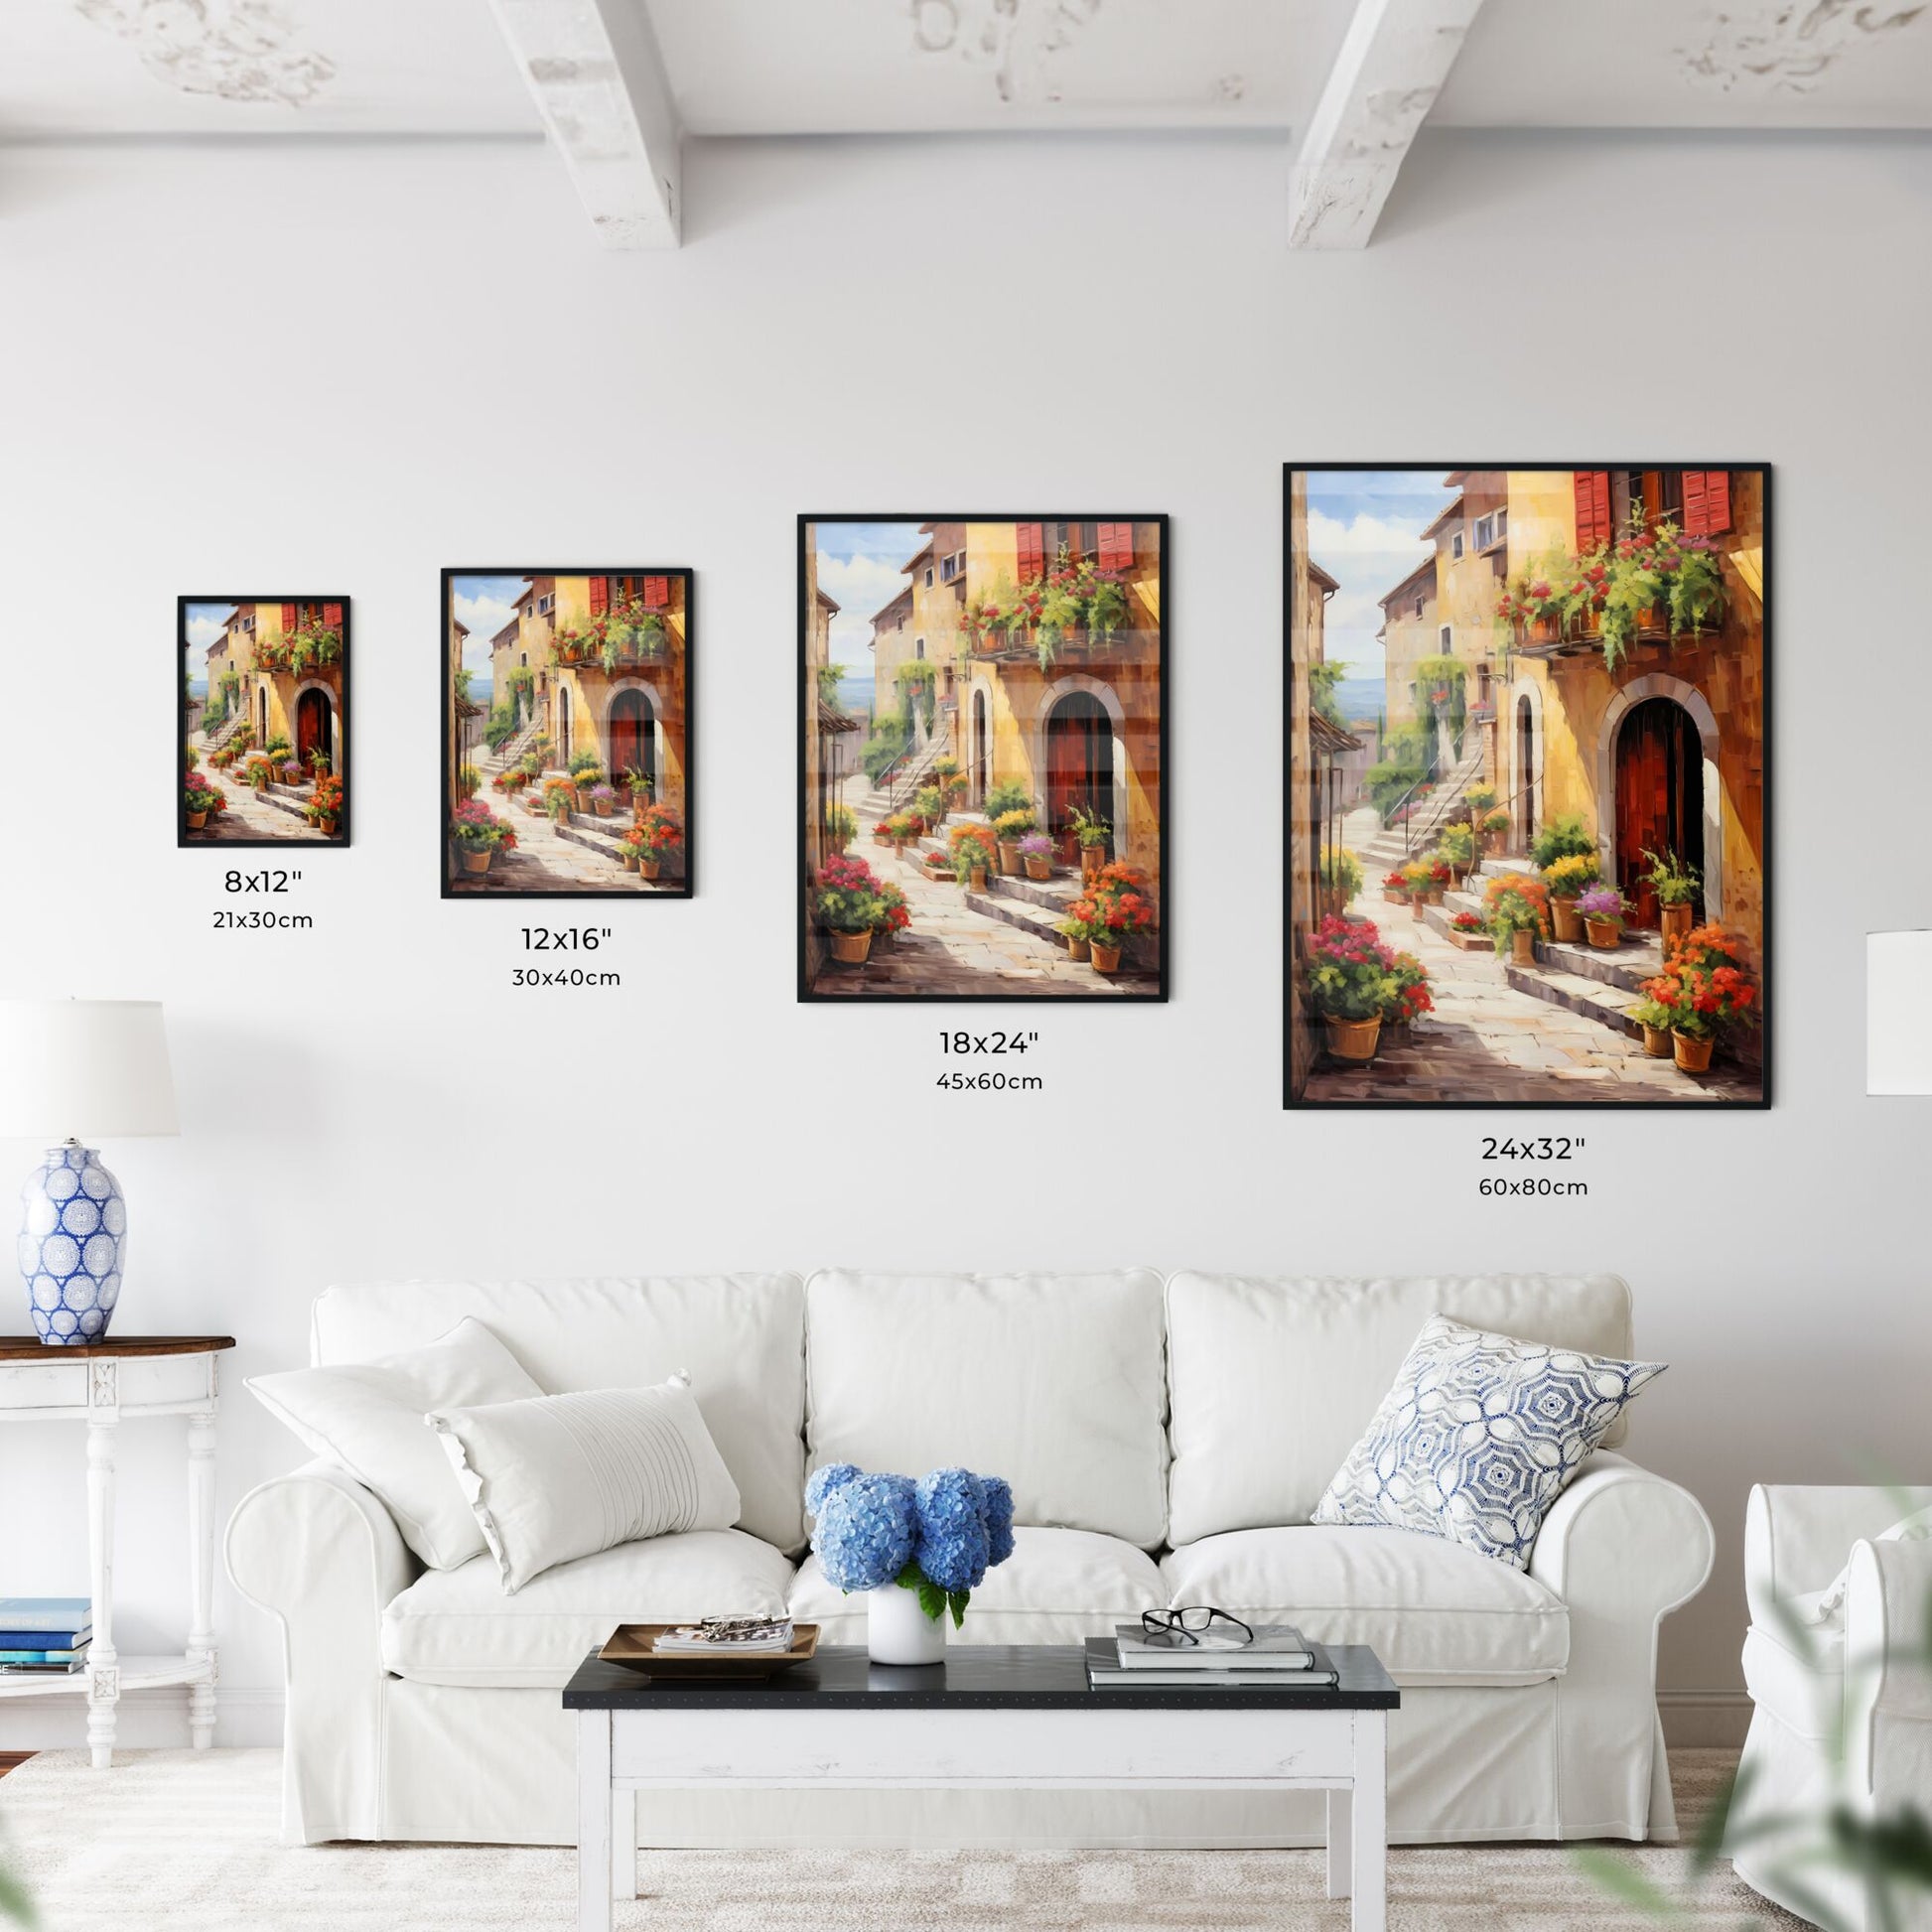 Painting Of A Street With Flowers Art Print Default Title